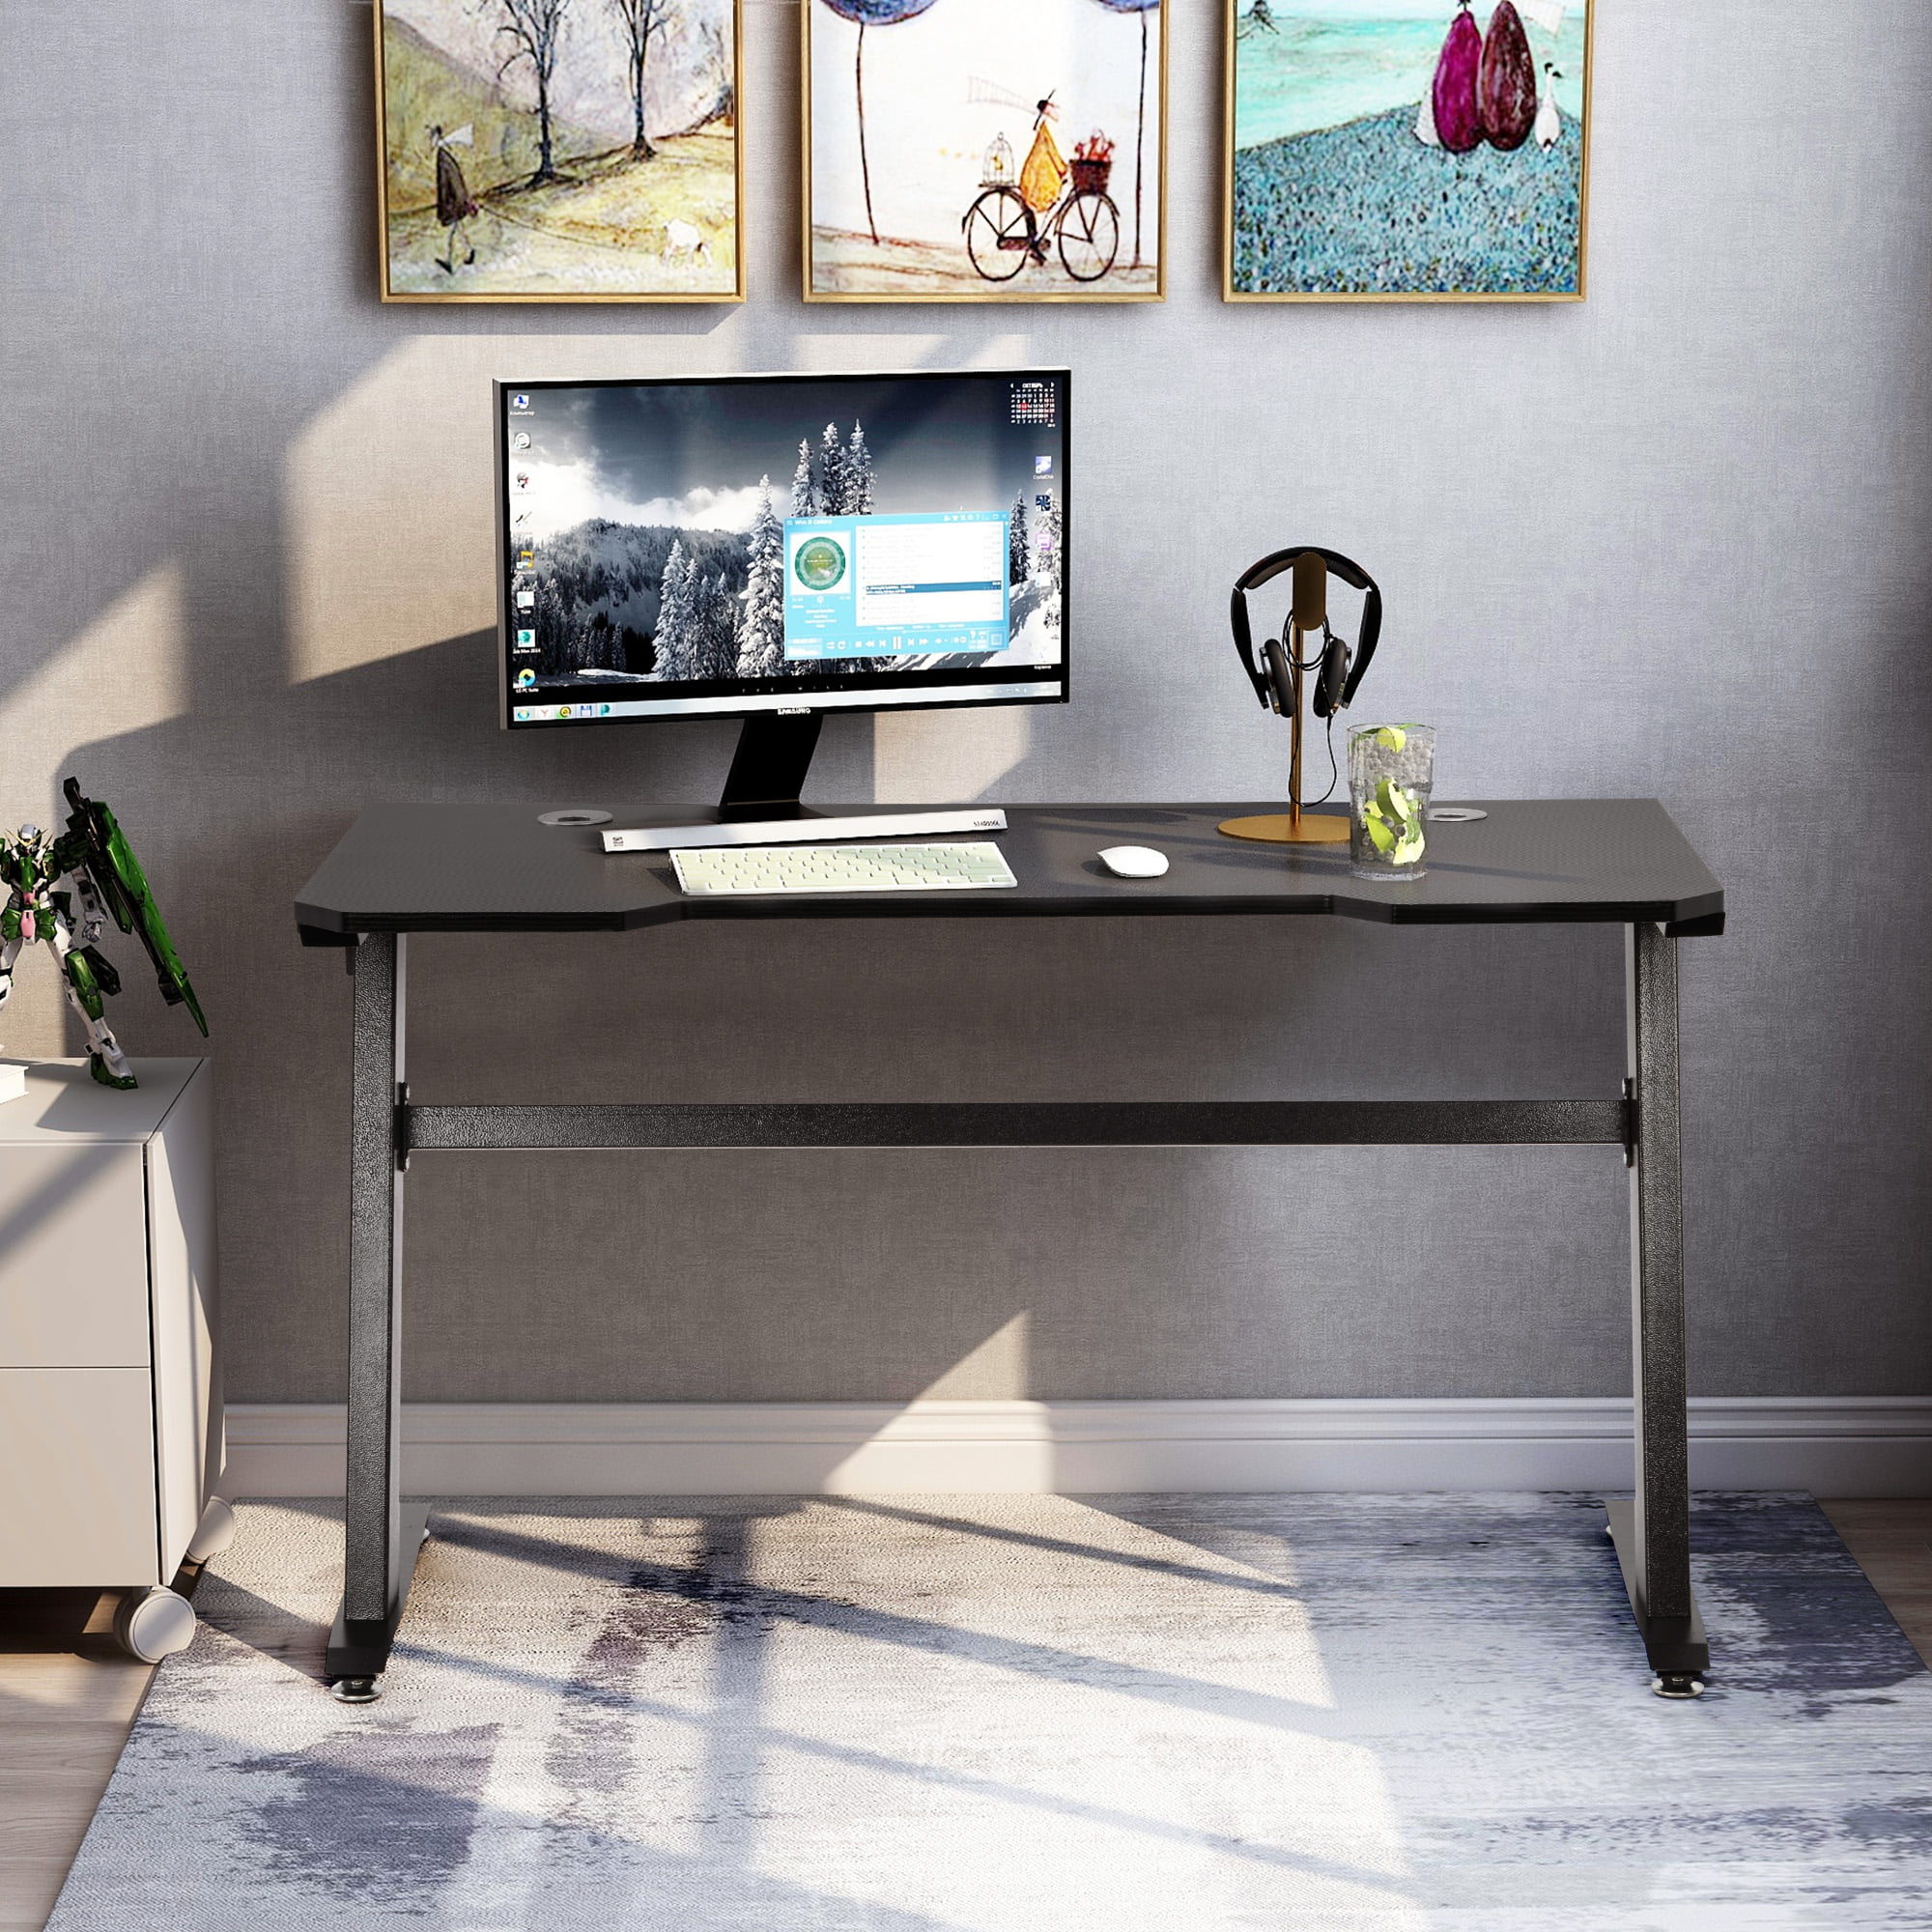 Details about   47” K-Shaped Gaming Desk Home Office Desk w/ Large Monitor Stand Office PC Desk 